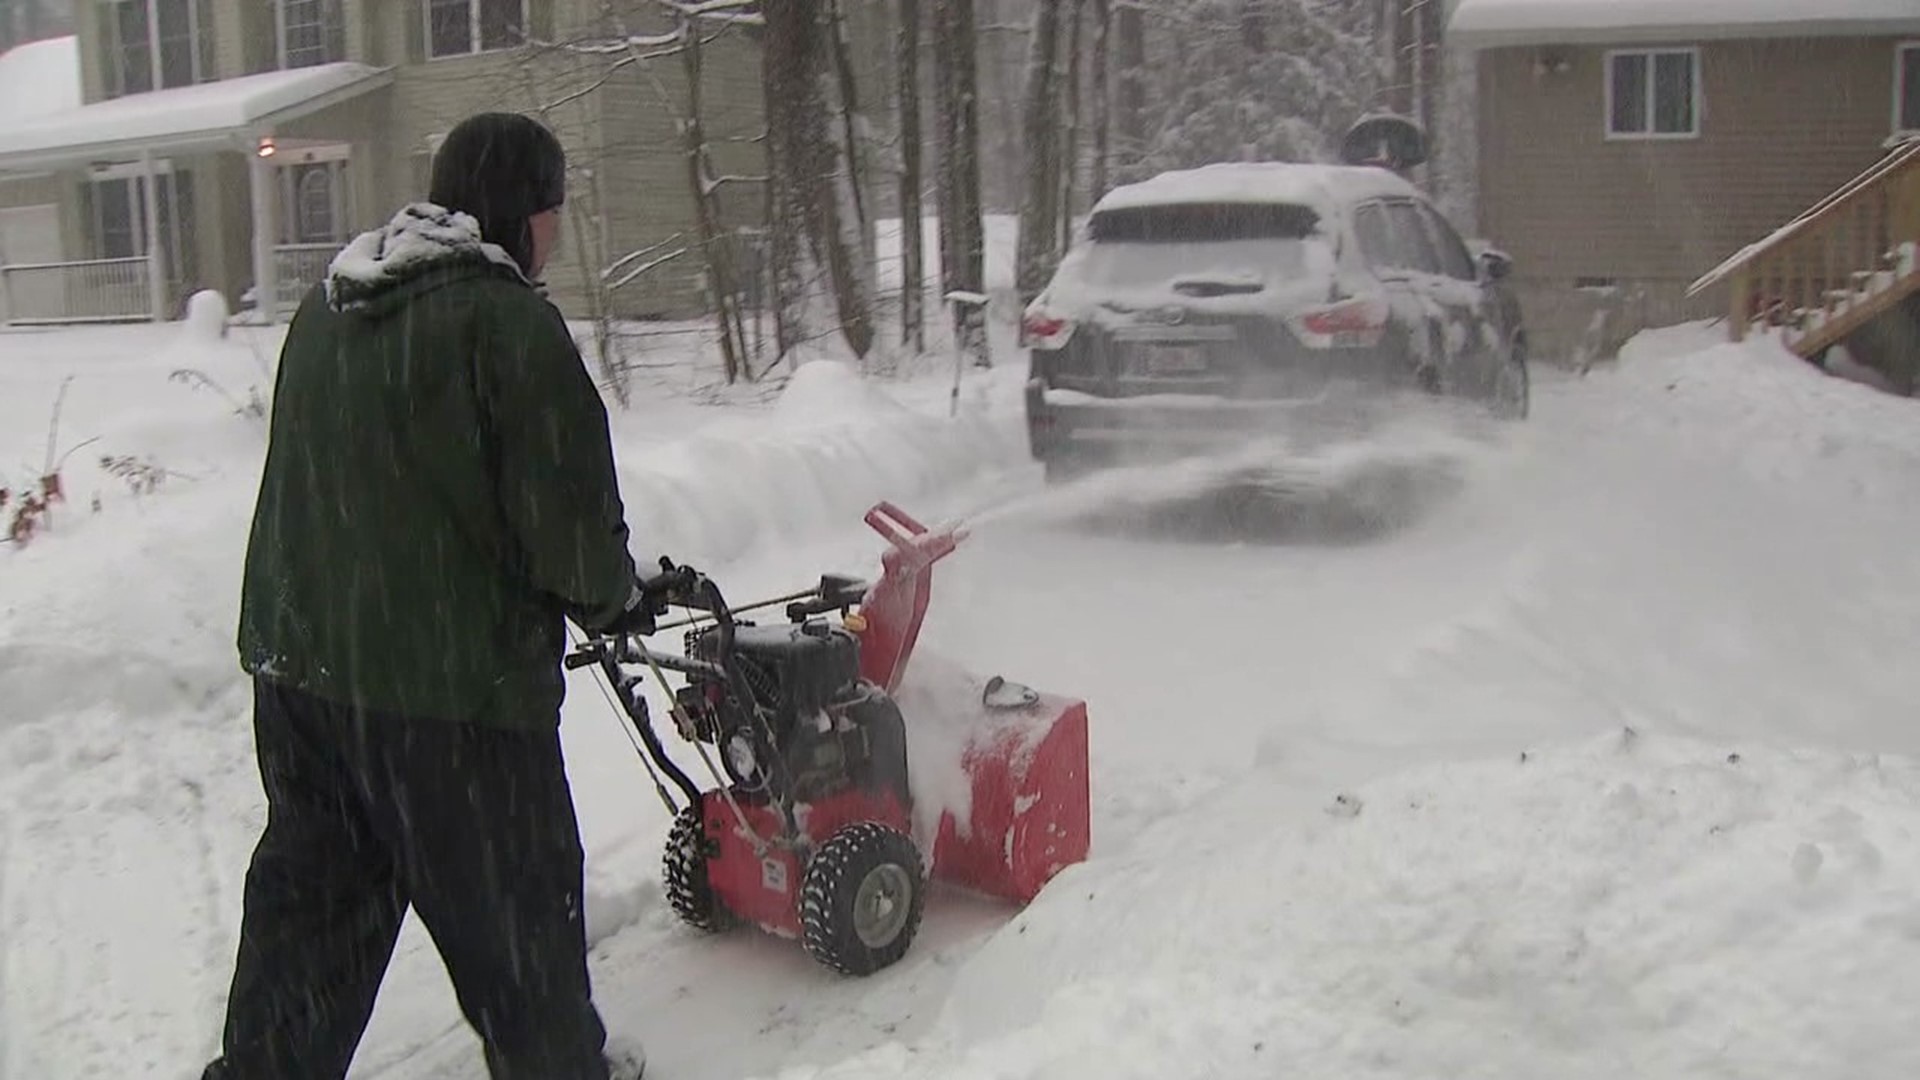 Newswatch 16's Amanda Eustice spoke with people who are digging out.